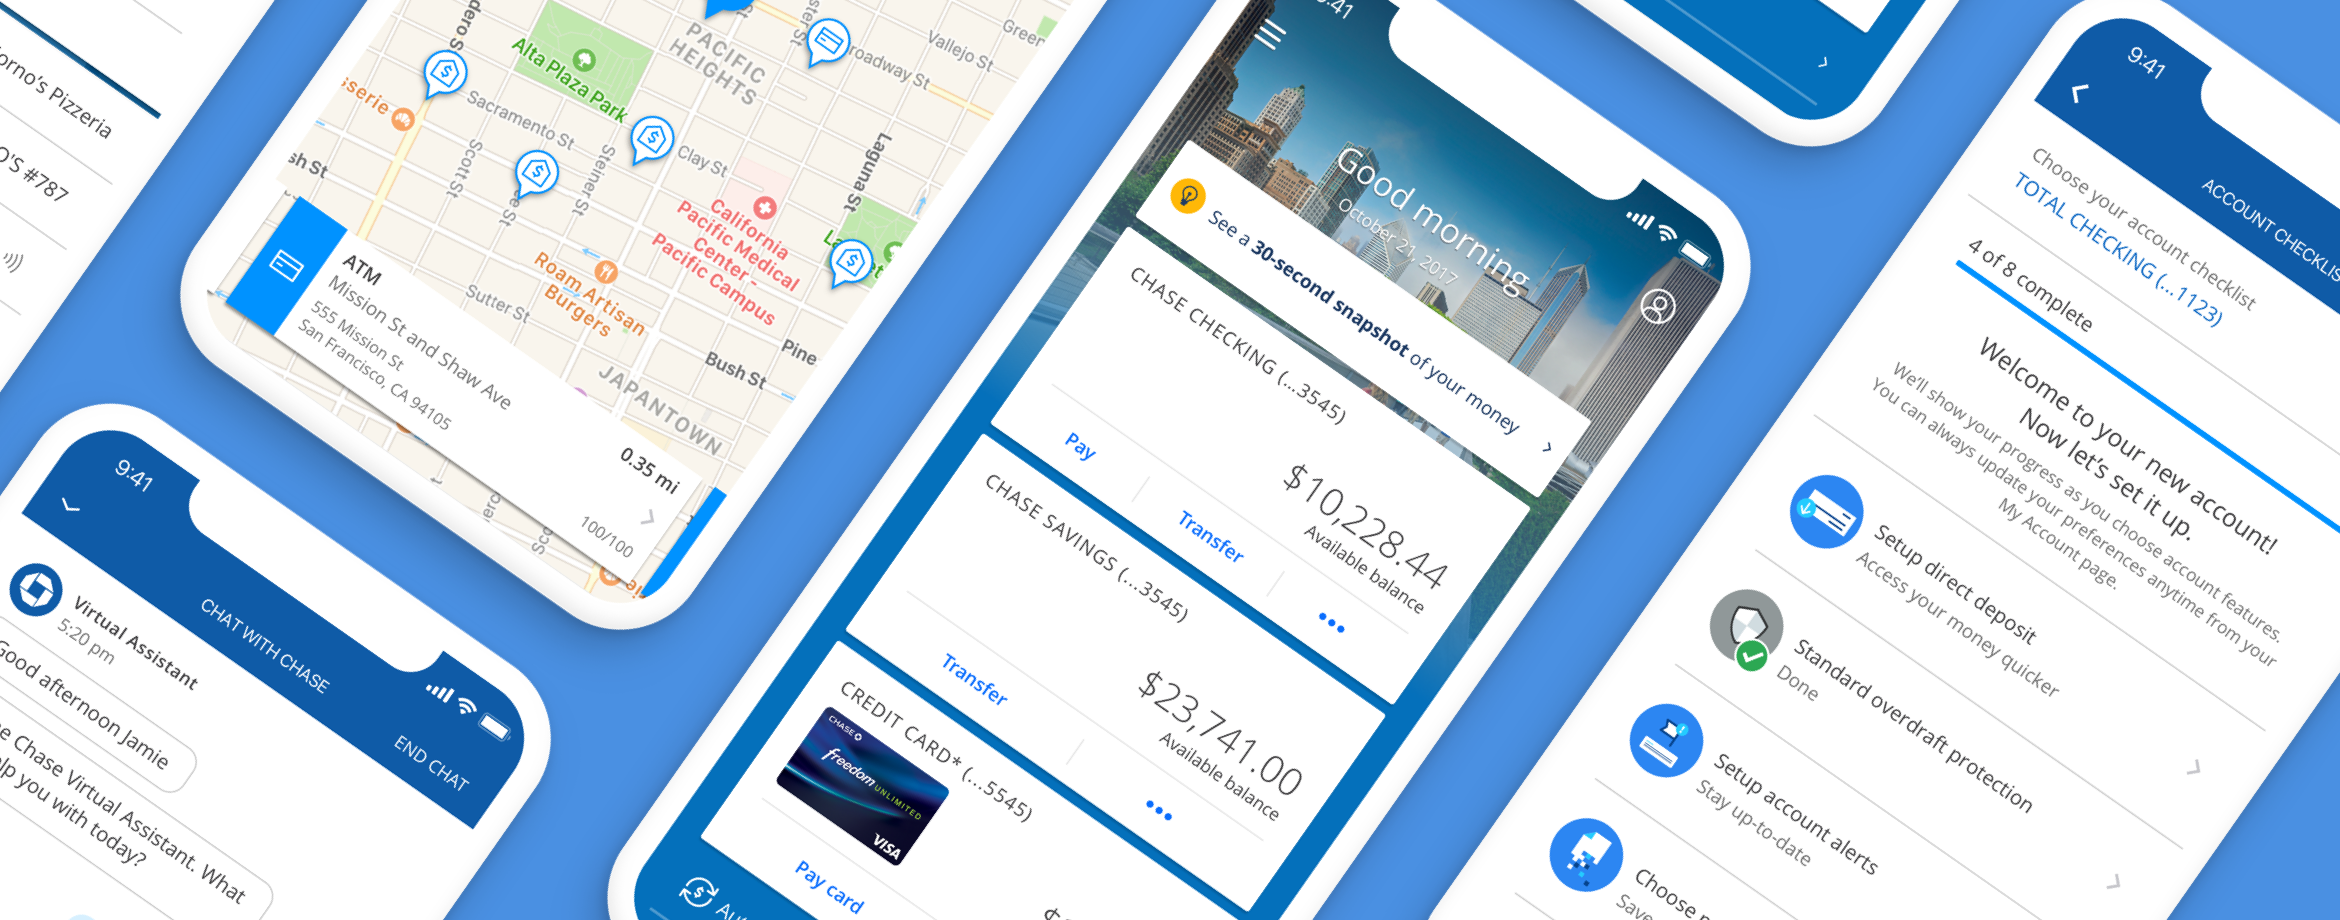 Other projects for Chase mobile